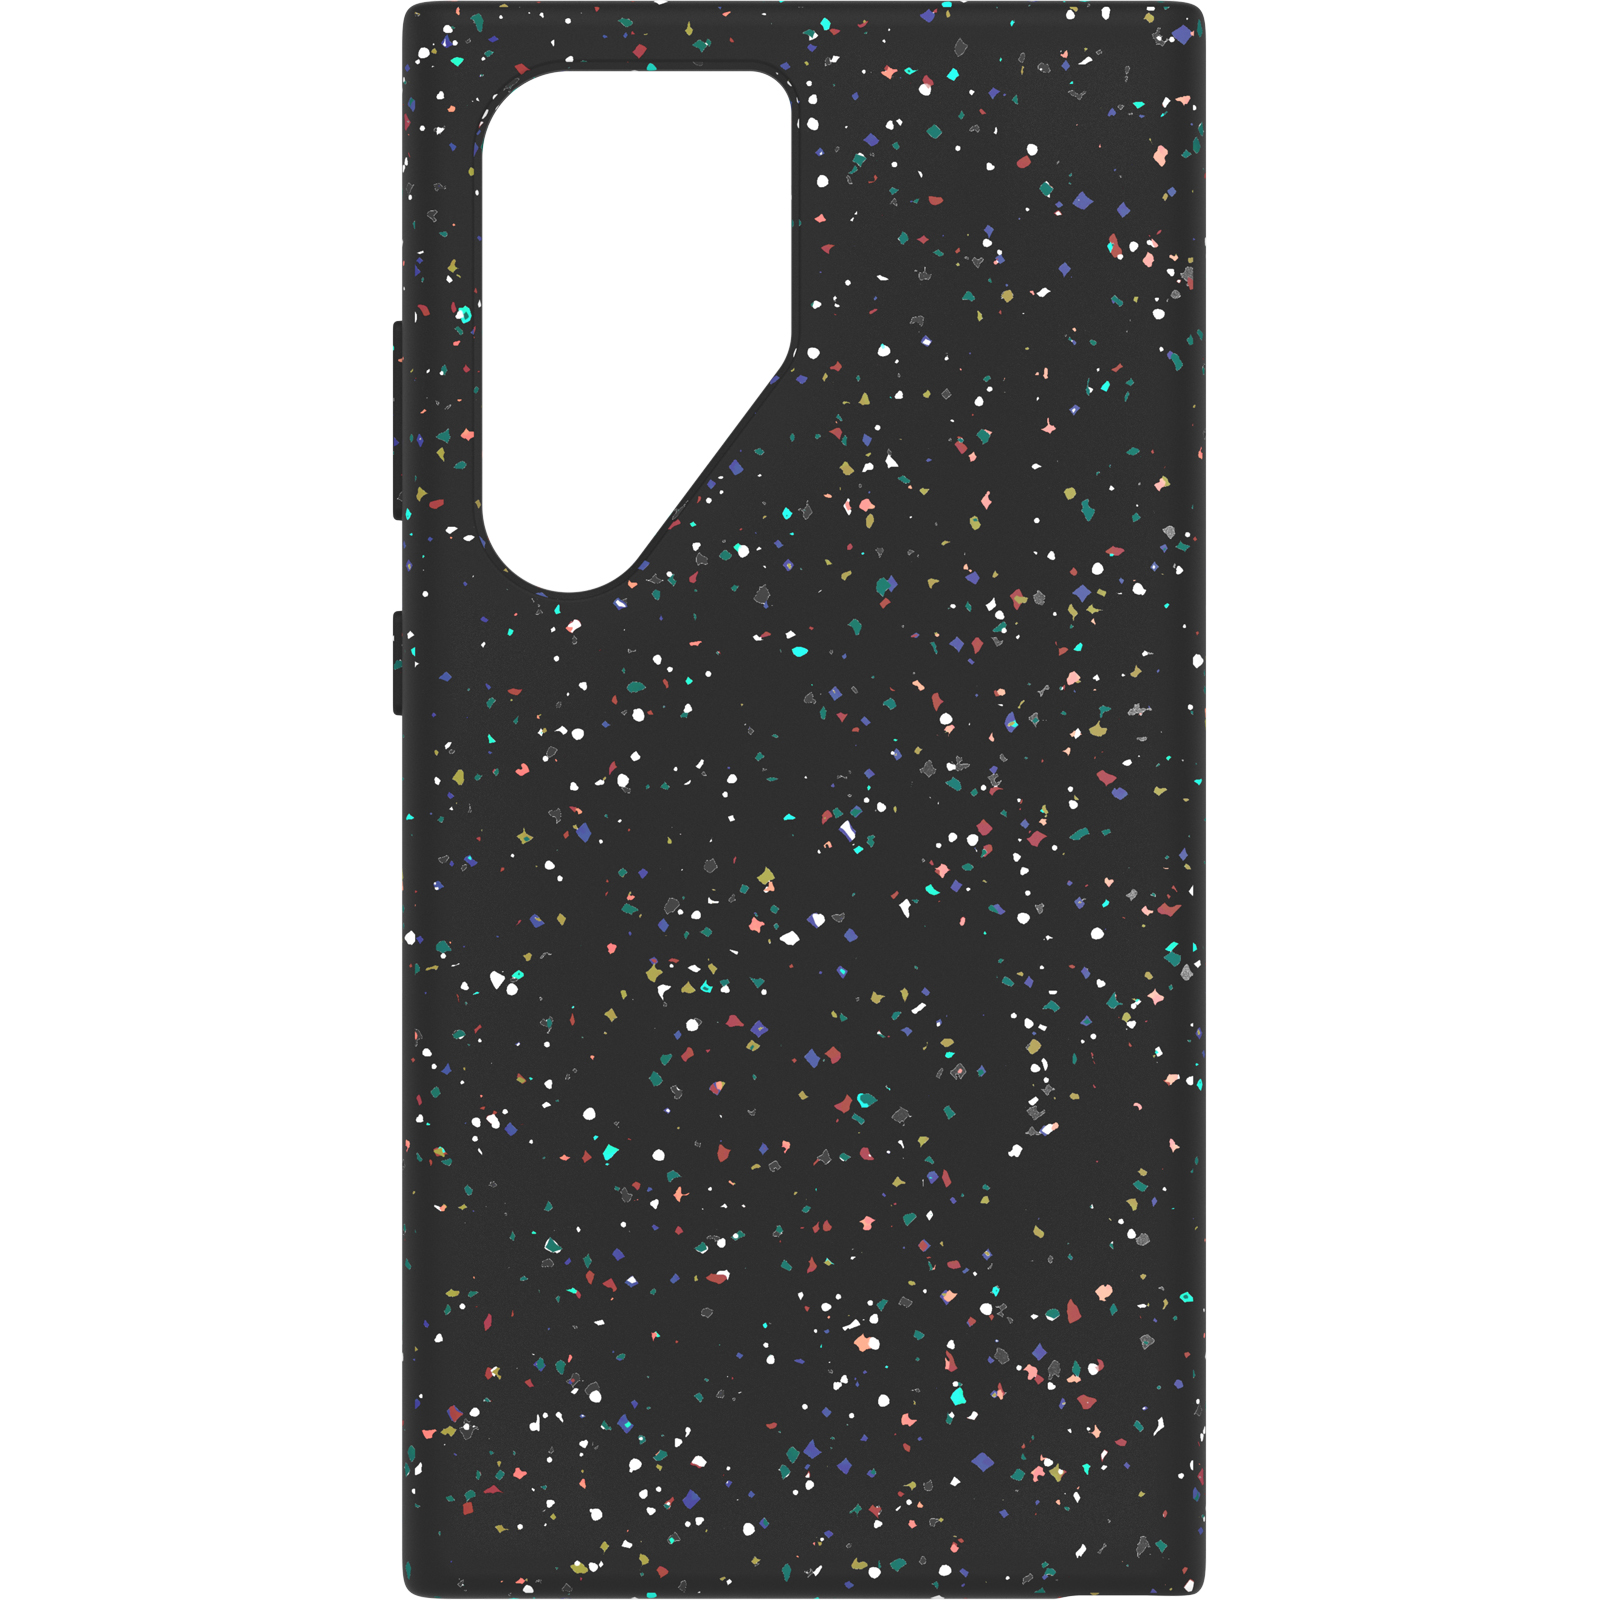 https://www.otterbox.de/on/demandware.static/-/Sites-masterCatalog/default/dw7f60bb98/productimages/dis/cases-screen-protection/core-galaxy-s24-ultra/core-galaxy-s24-ultra-carnivalnight-b.jpg